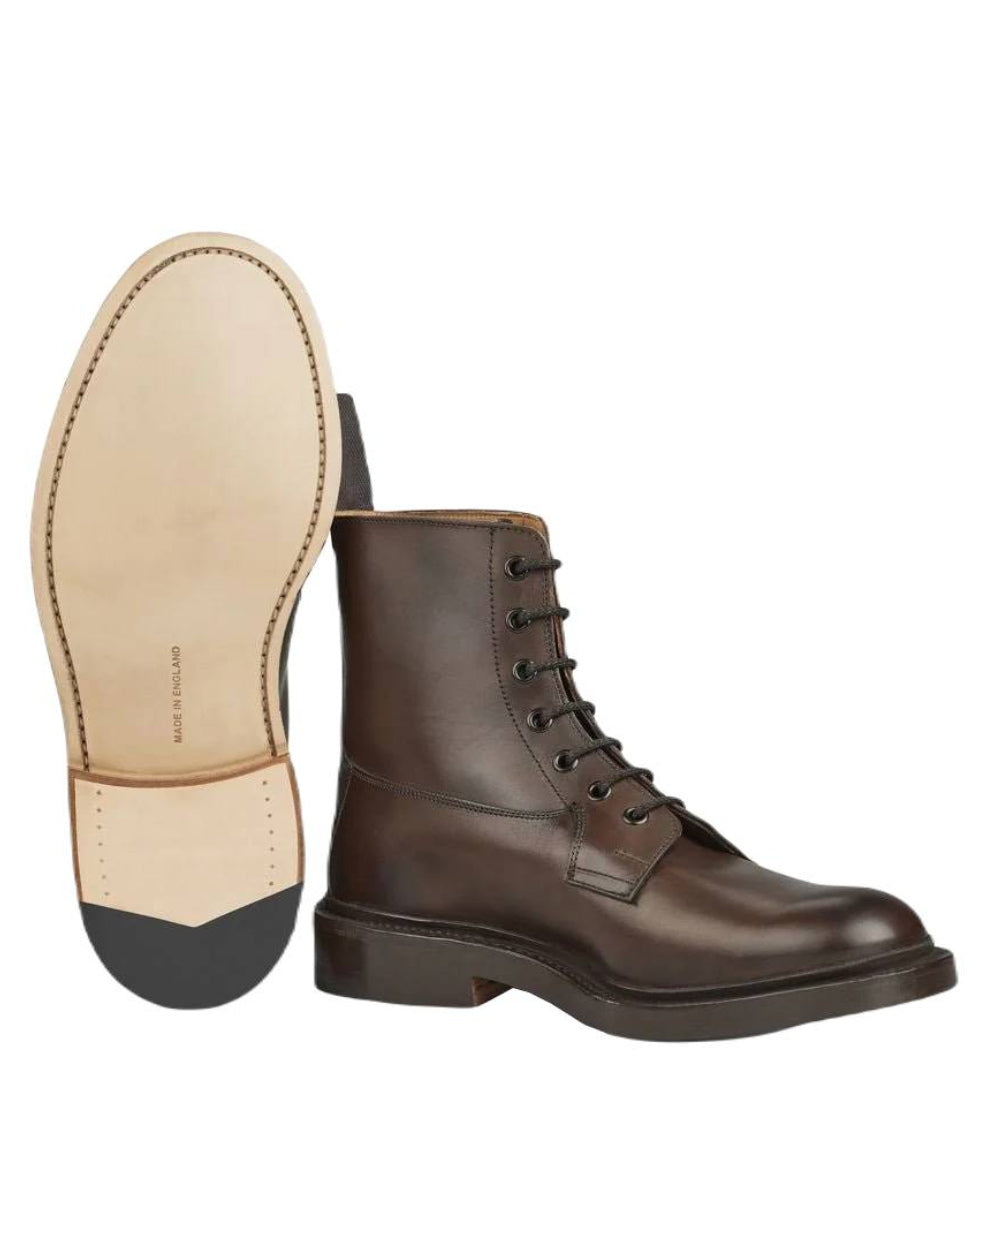 Espresso Burnished Coloured Trickers Burford Leather Sole Country Boot On A White Background 